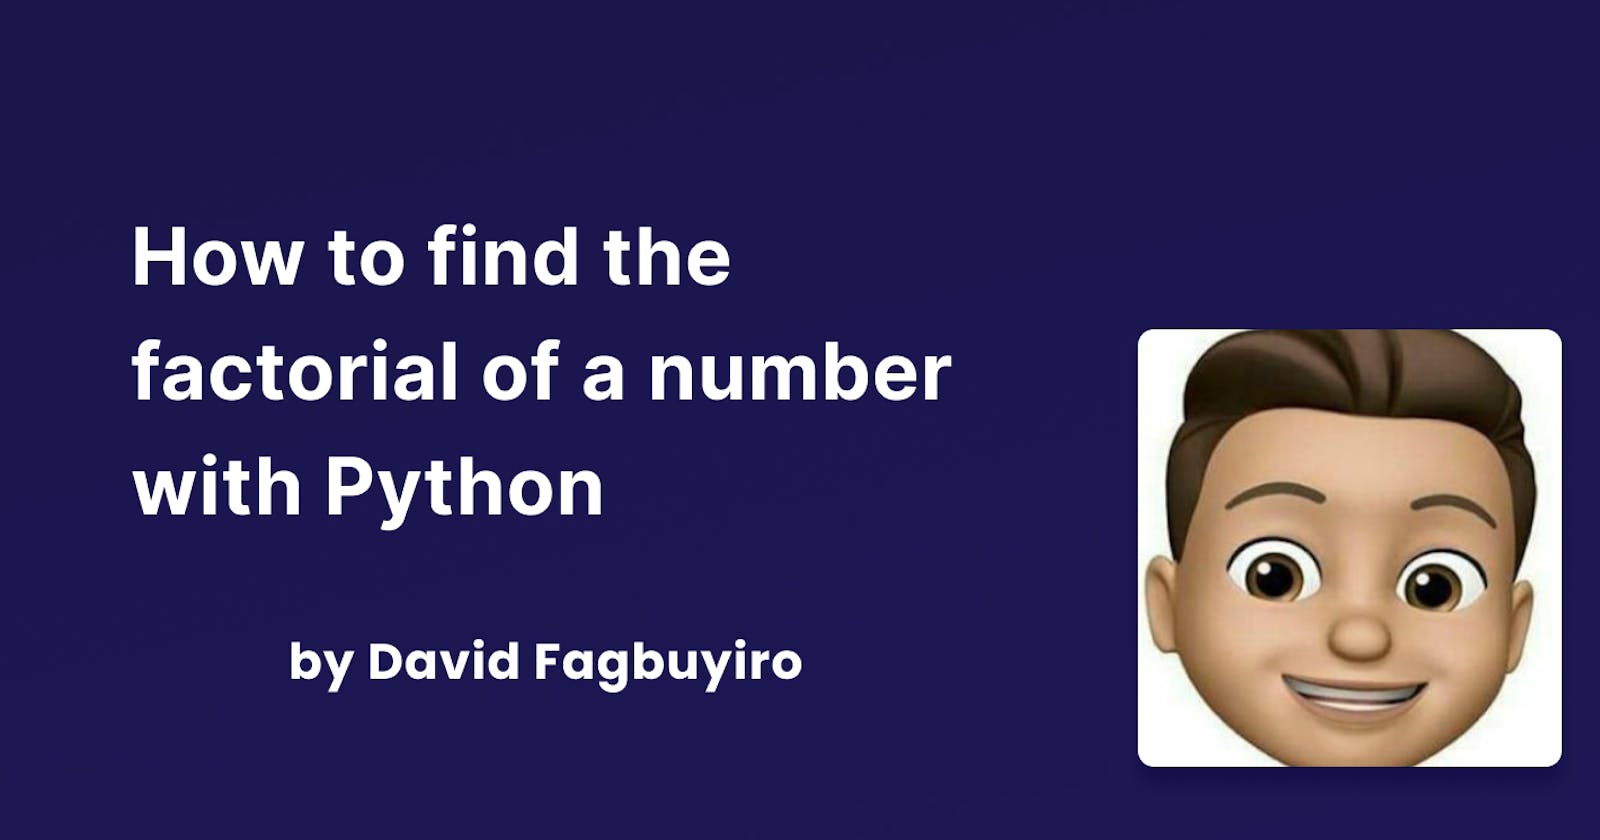 How to find the factorial of a number with python